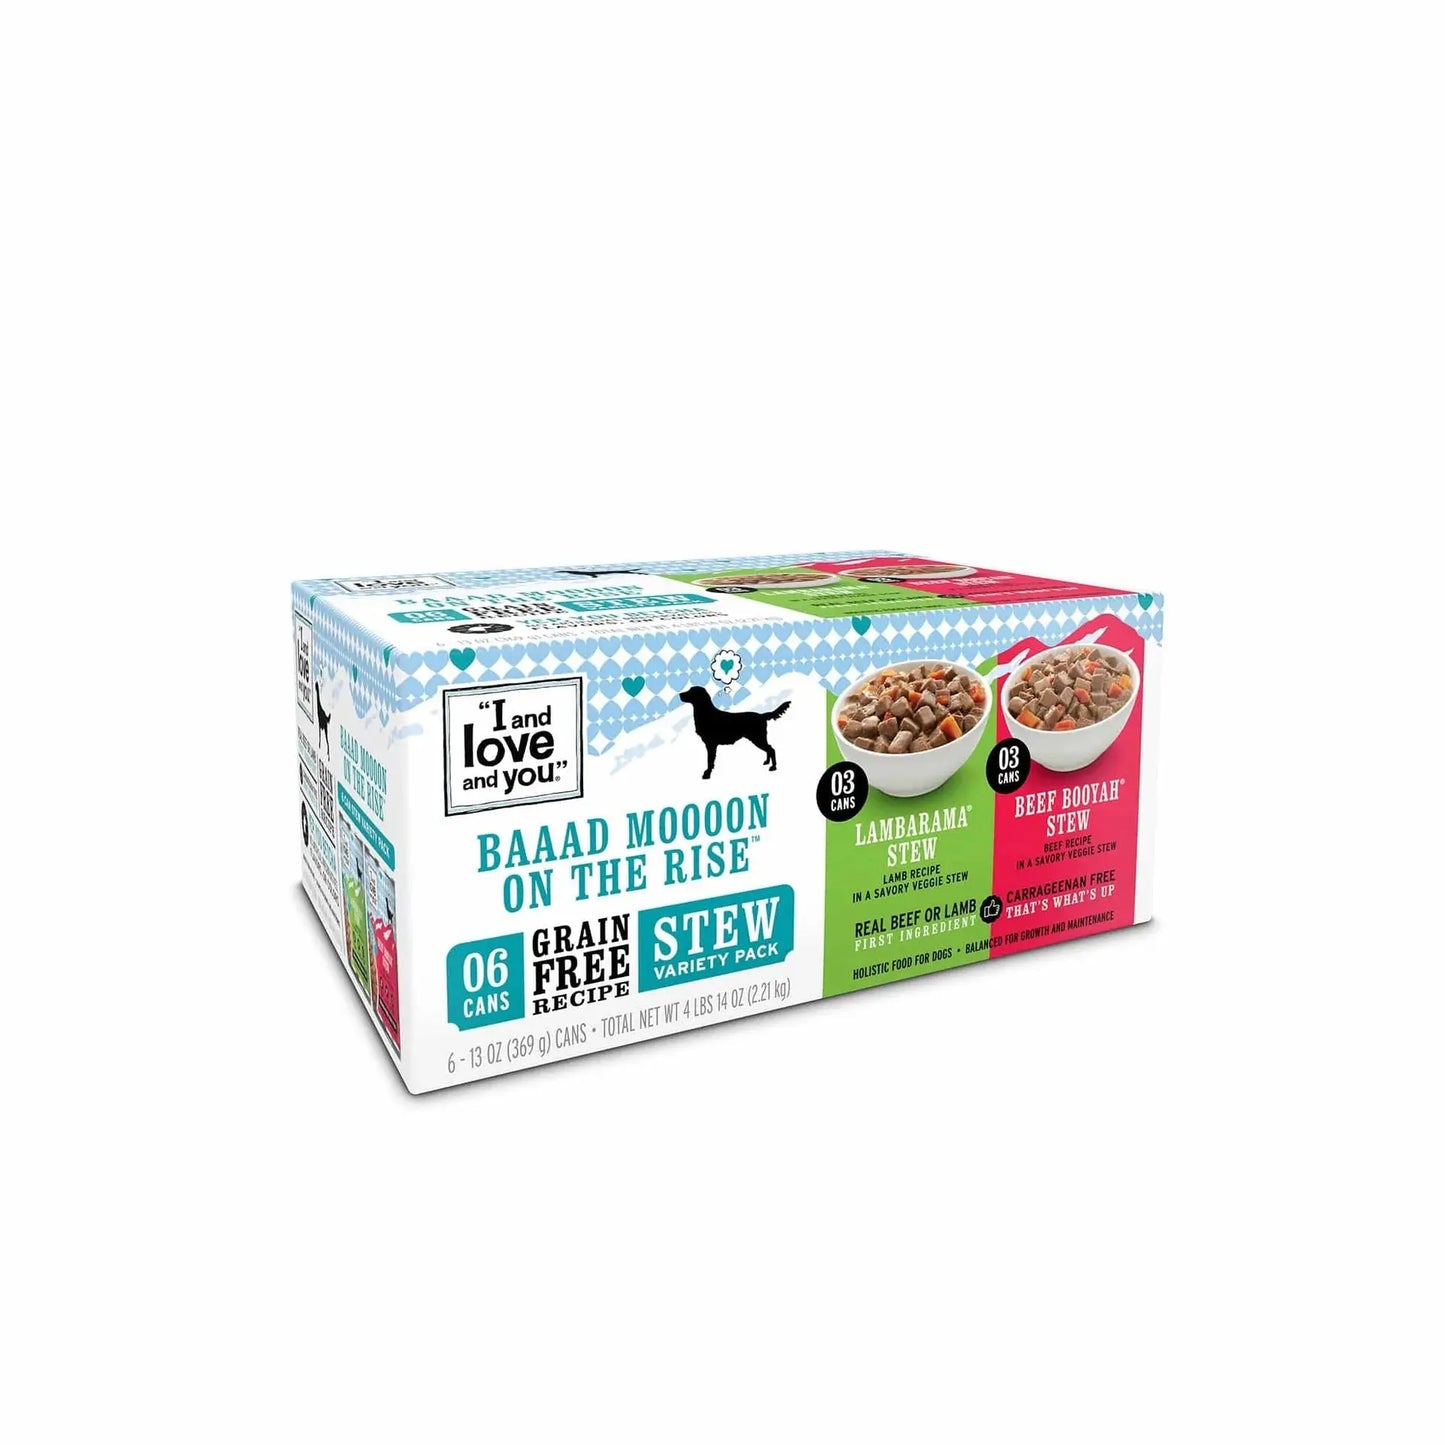 I and Love and You Dog Can Variety-Pack, Stew - Bad Mooooon On The Rise Wet Dog Food 13 OZ CAN (6 PACK) I and Love and You